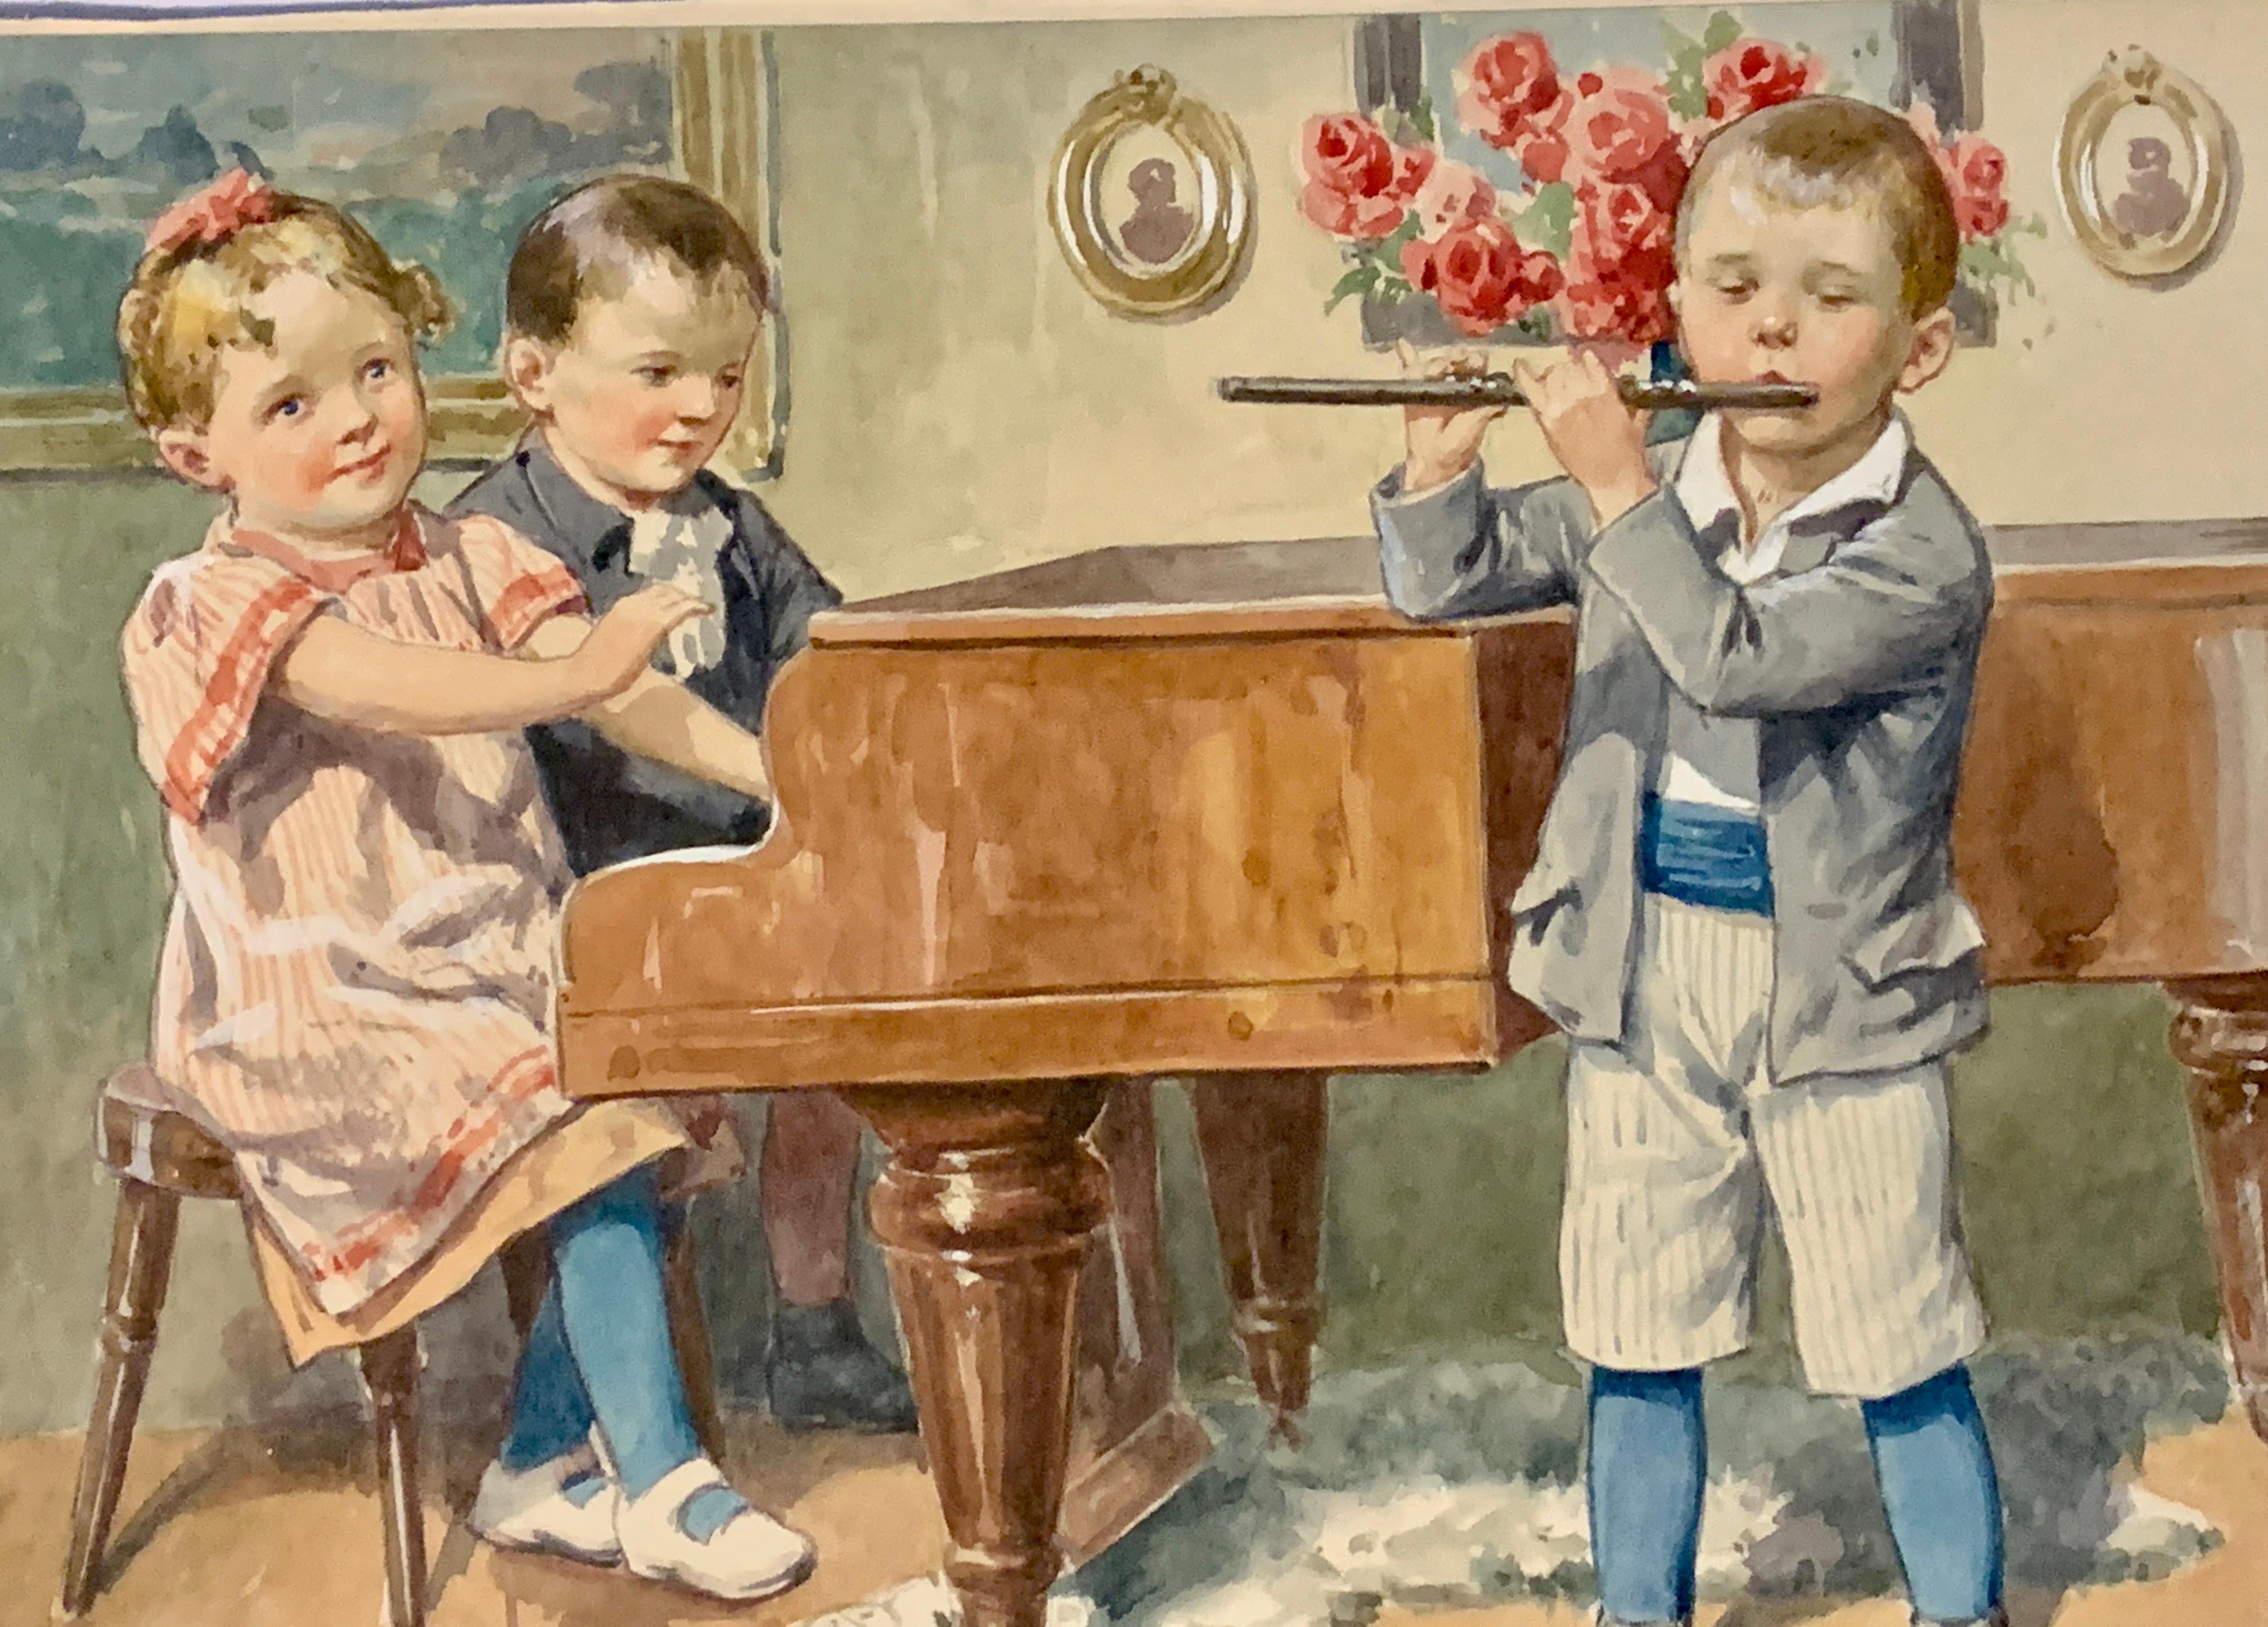 Early 20th century German or Austrian children playing a piano and flute - Art by Karl Feiertag